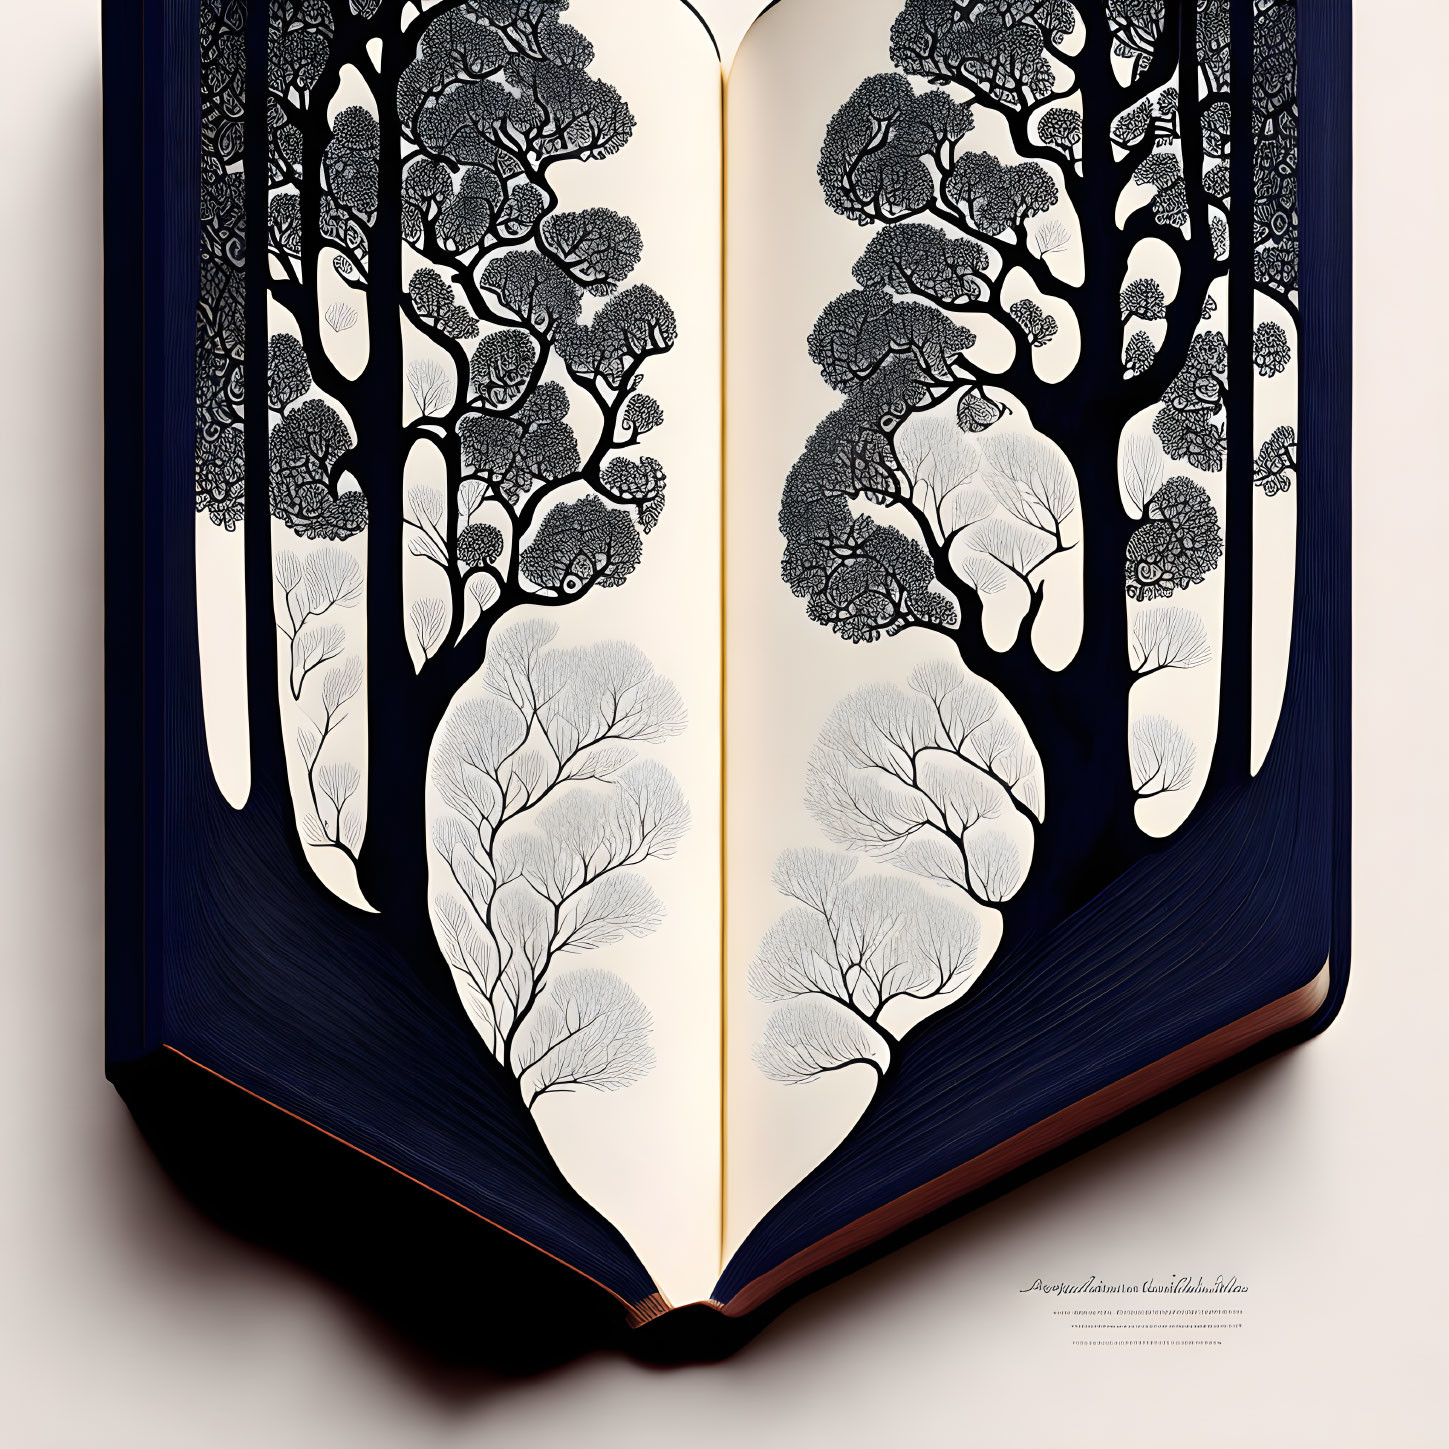 Intricate black and white paper art of trees in an open book